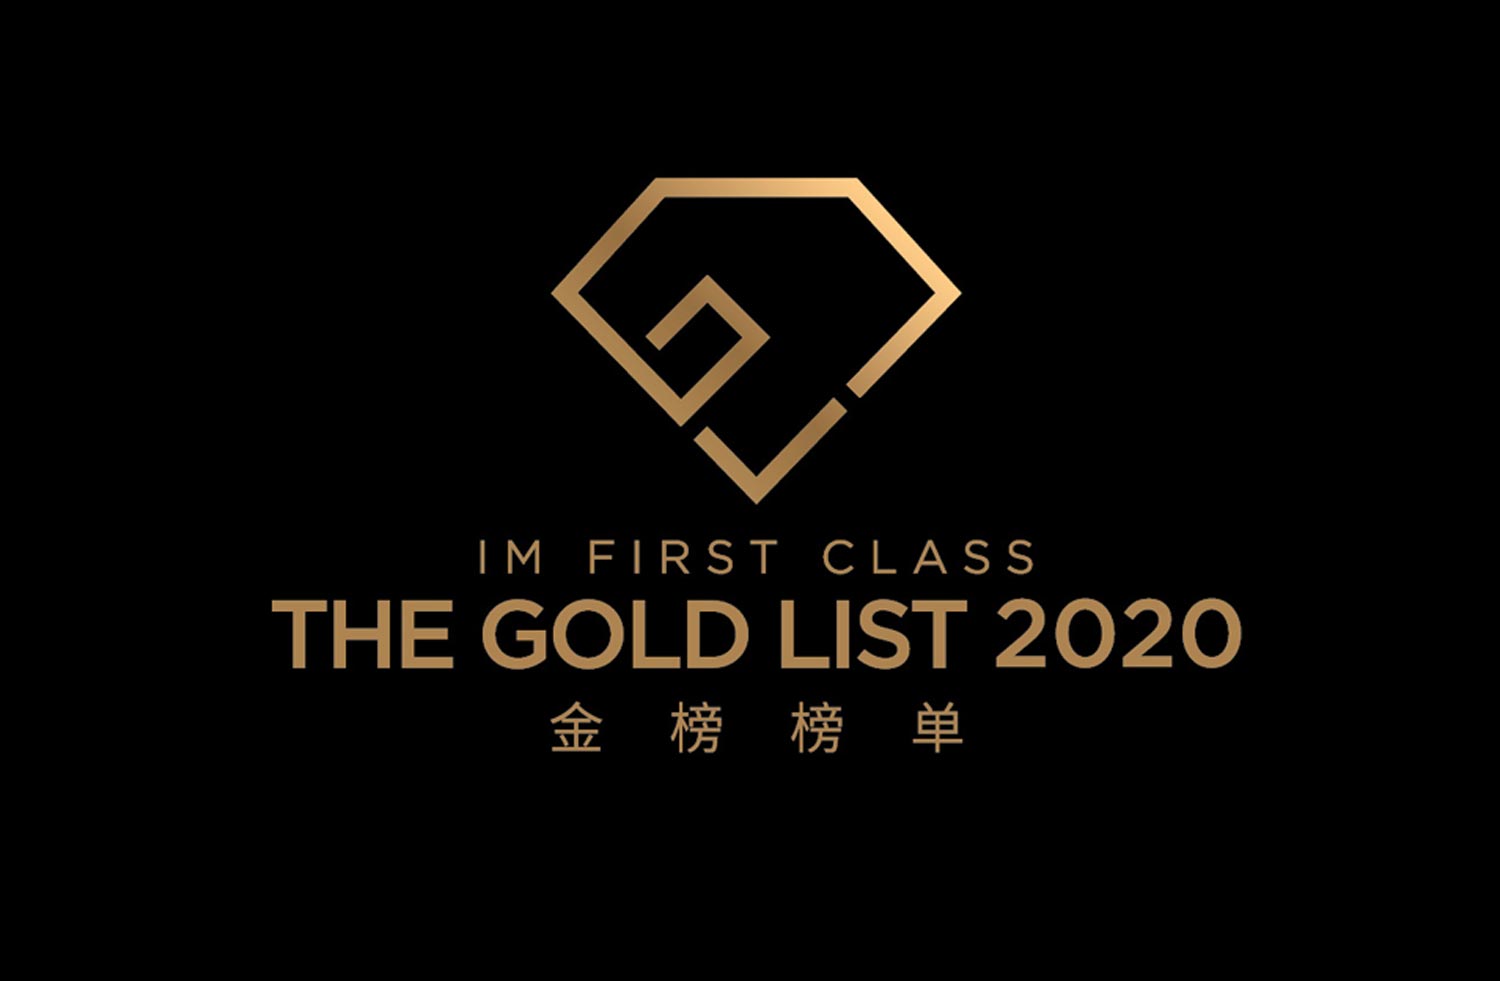 IM First Class Magazine Is Proud To  Announce The Inaugural Gold List 2020 Finalists